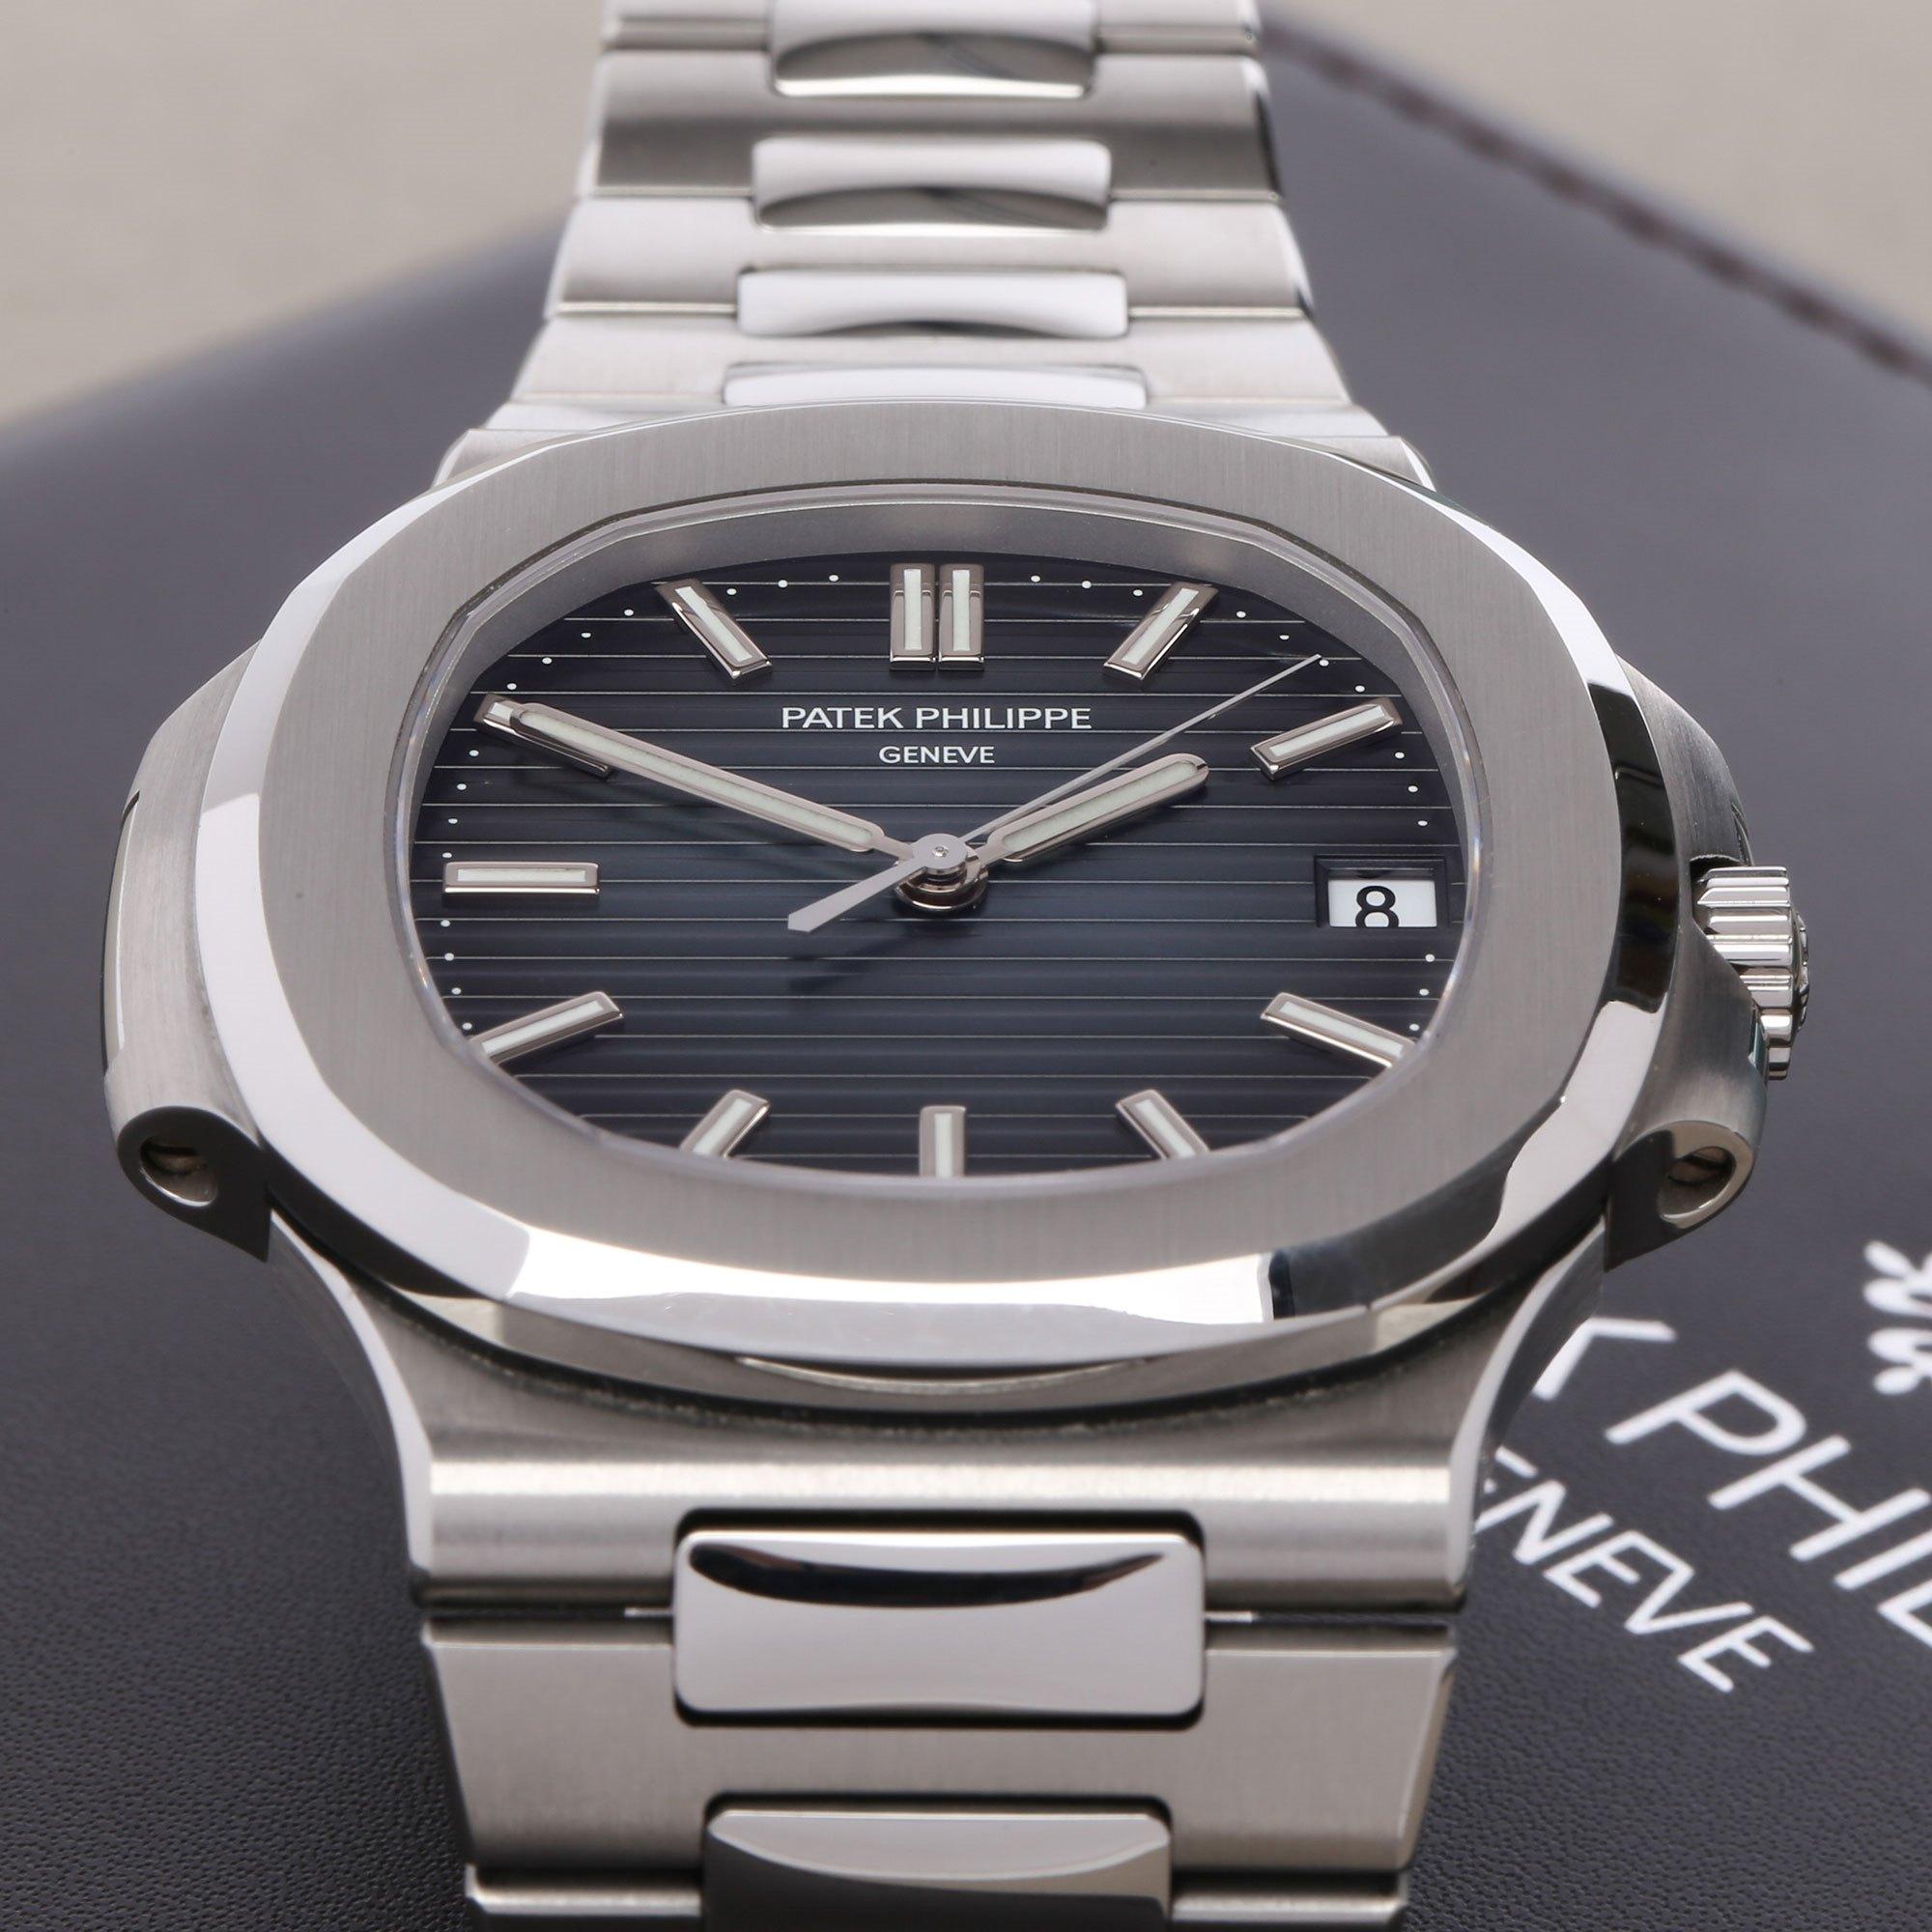 Patek Philippe Nautilus 5711/1A-010 Men's Stainless Steel Unpolished Watch 2